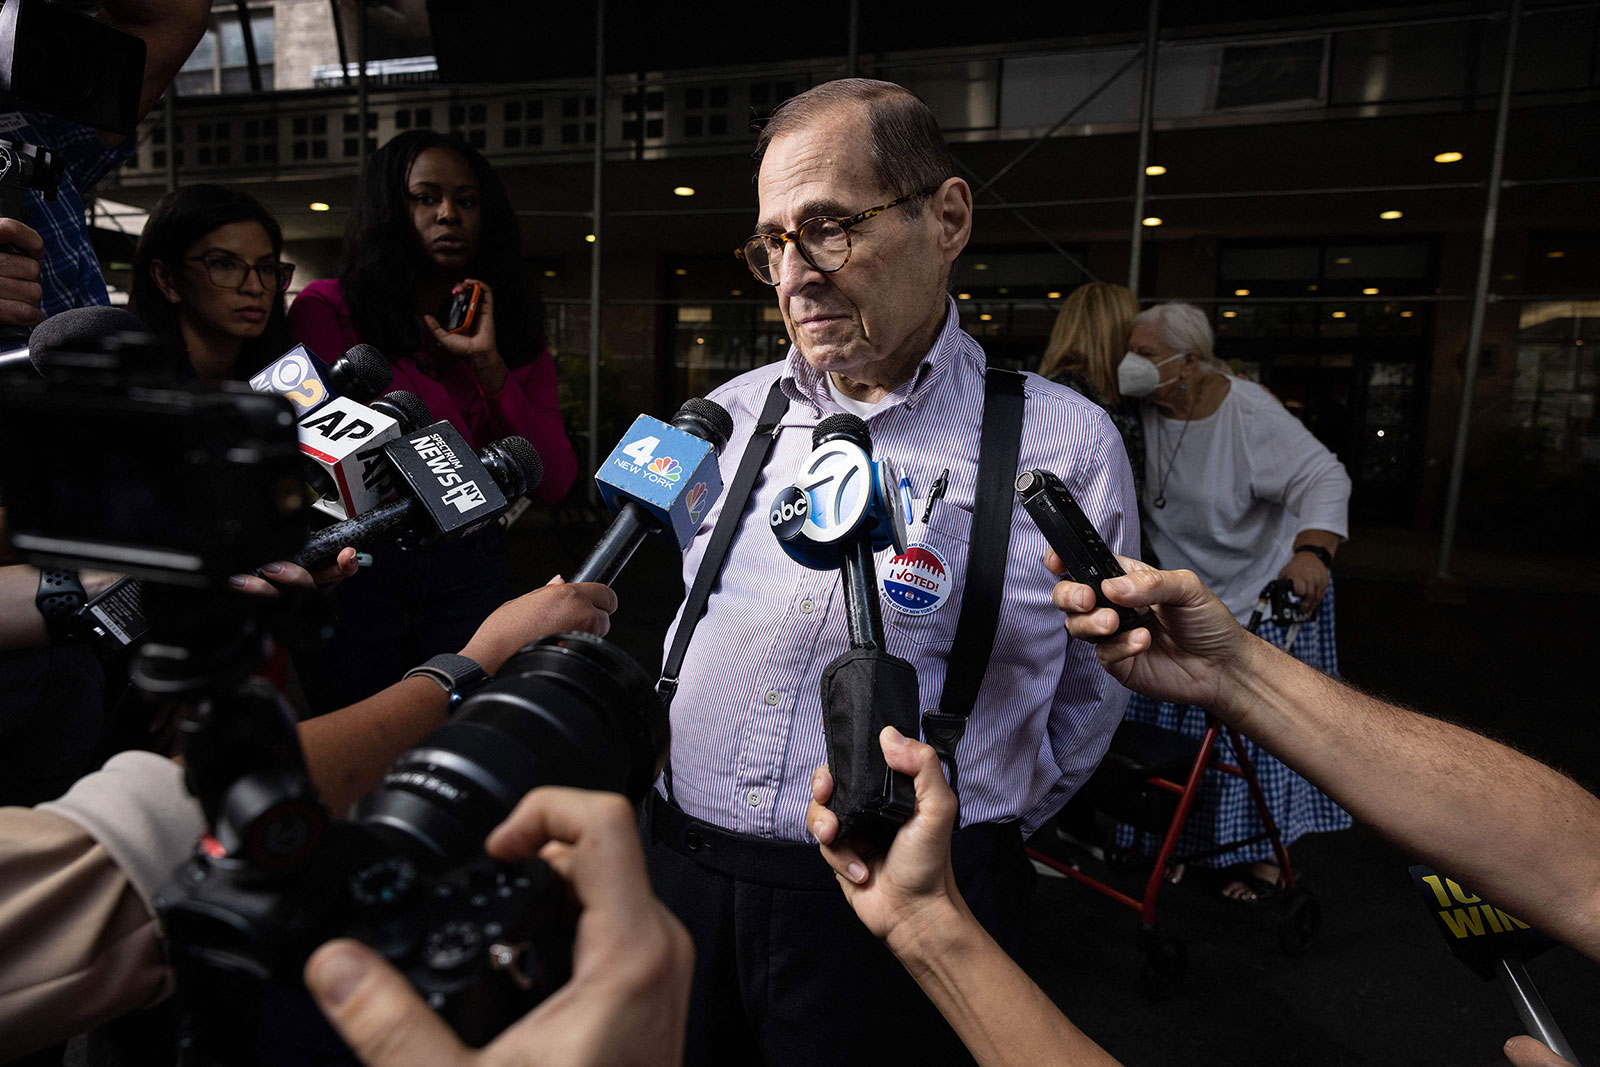 Rep. Jerry Nadler speaks to reporters after voting in New York on Tuesday.